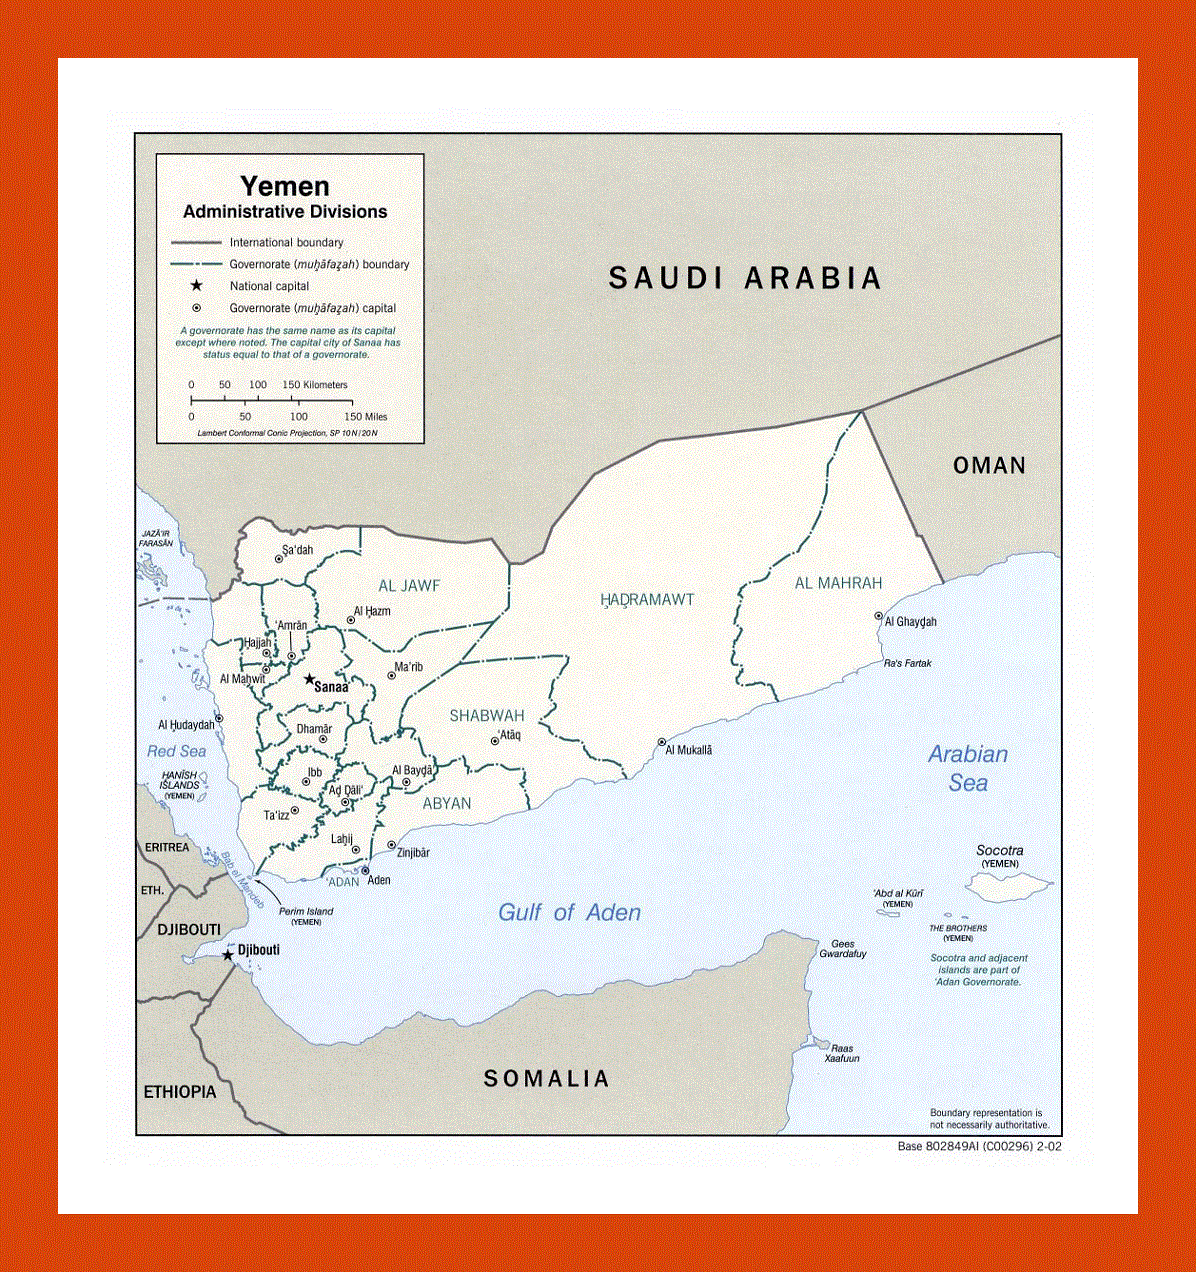 Administrative divisions map of Yemen - 2002